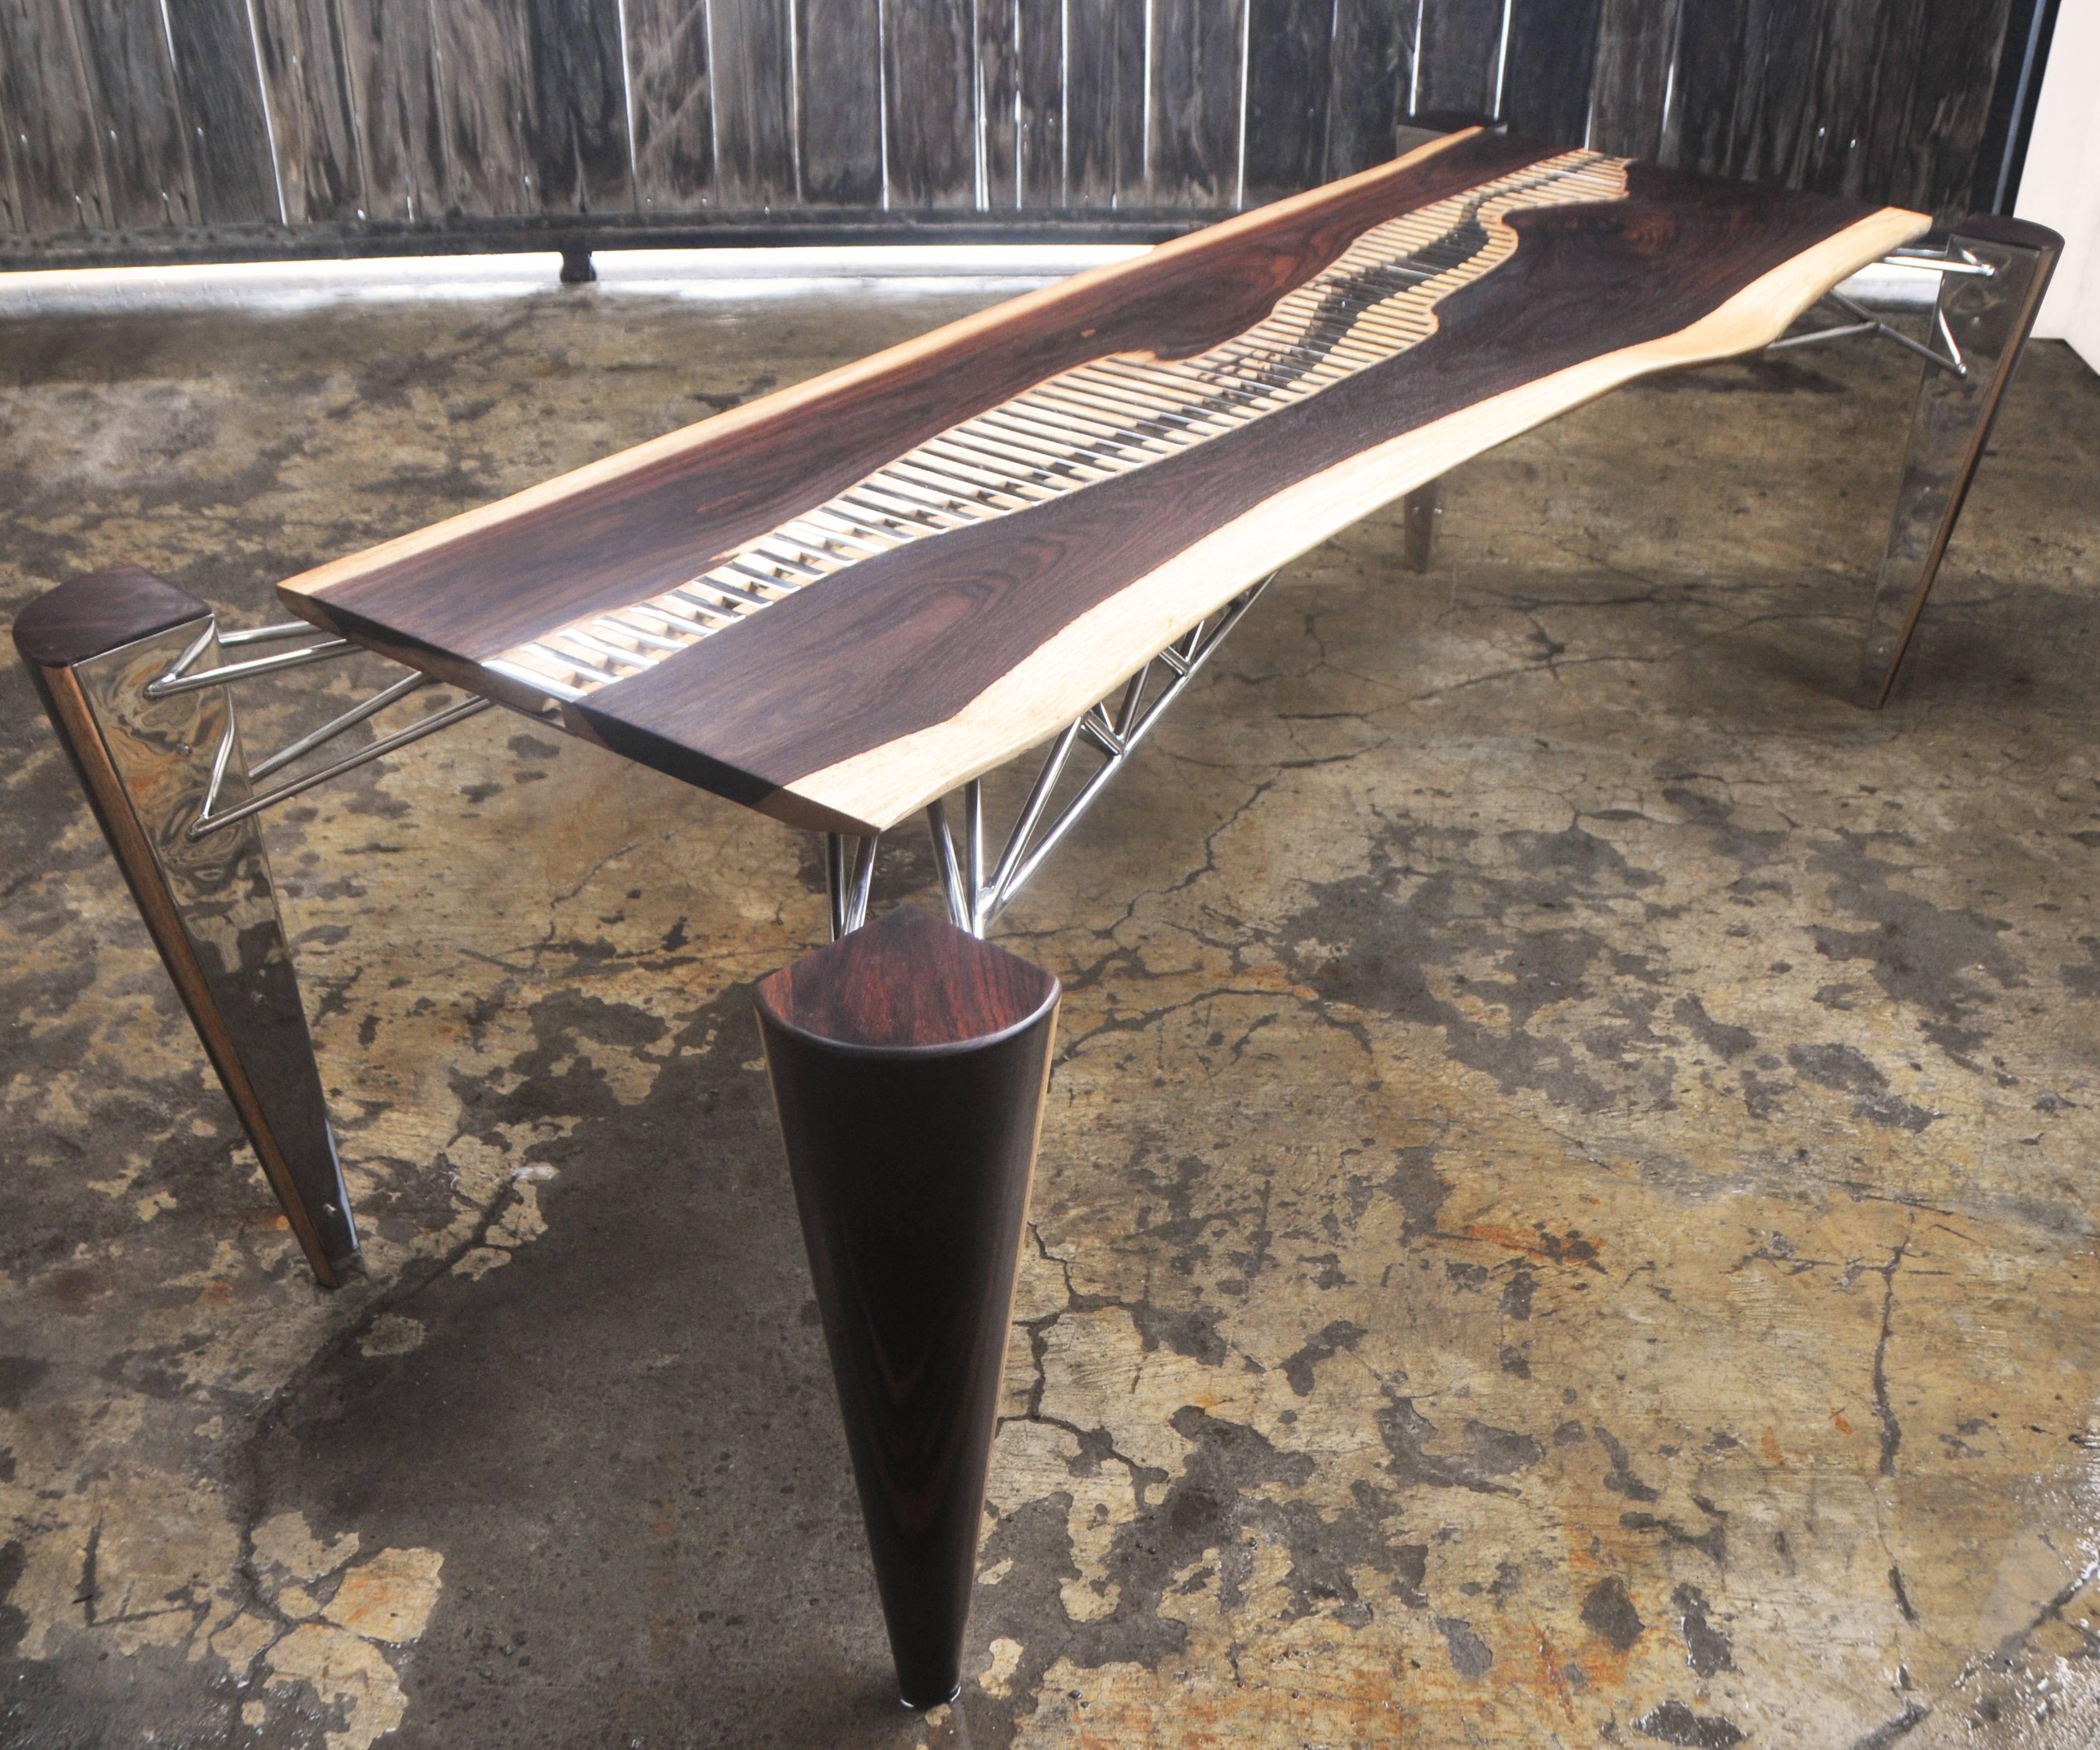 Exceptionally stunning and unique table designed by Bruno Helgen. Inspired by Mahakam River (Mahakam is the East Borneo longest River).
This piece is made of rosewood and stainless steel with mirror polished finishing.

Dimension:
Outer: 236 (D)